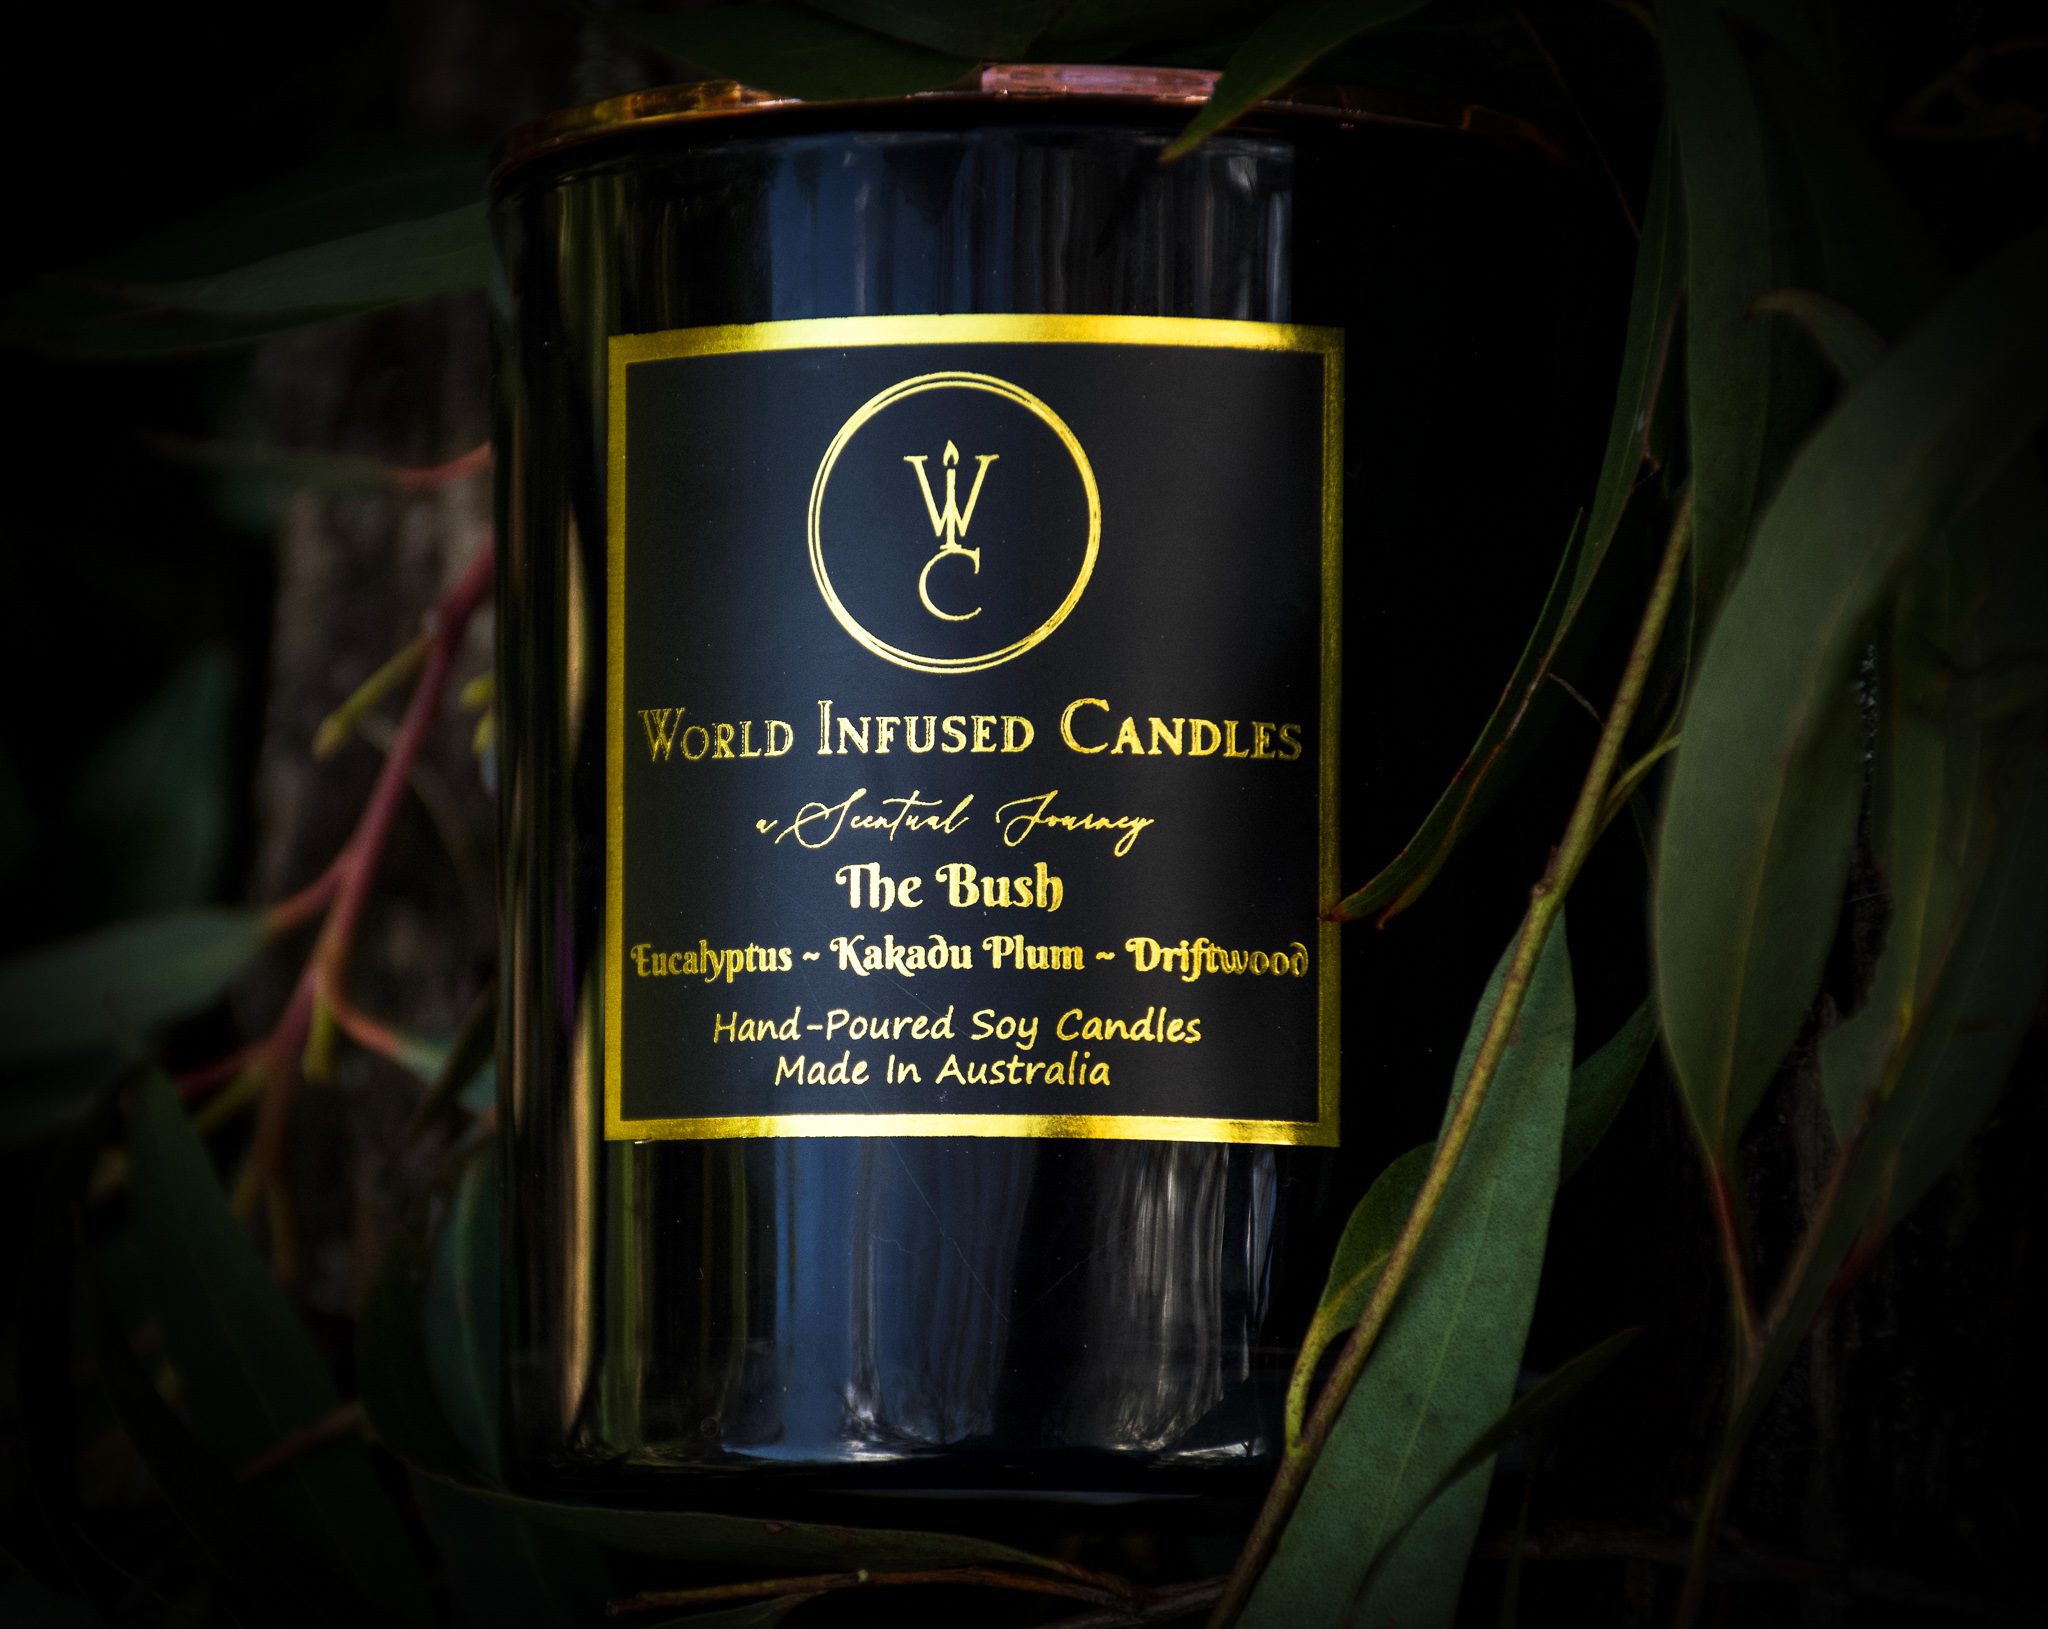 The Bush kakadu plum candle combined with the scents of eucalyptus and drifwood